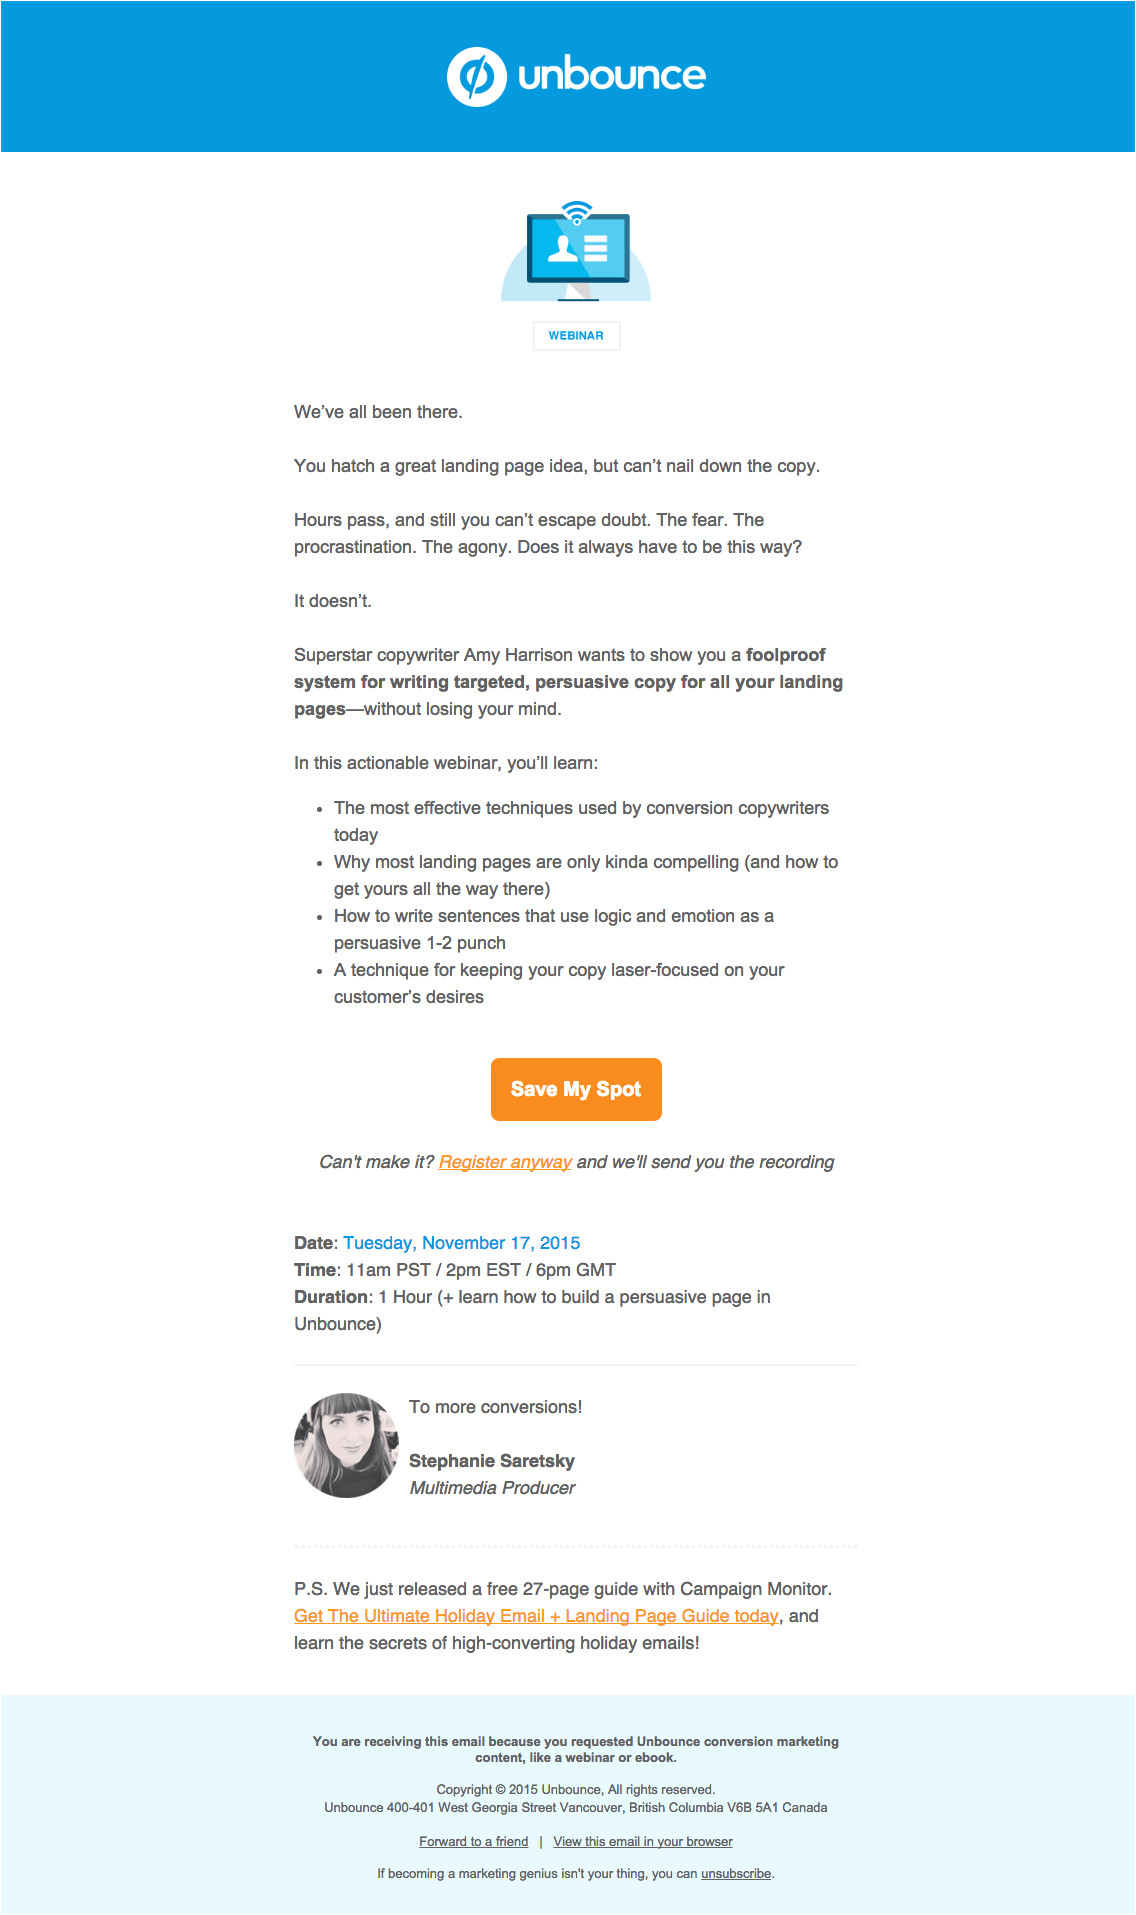 Webinar Invitation Email Template How to Create Webinar Invitations that Drive Registrations